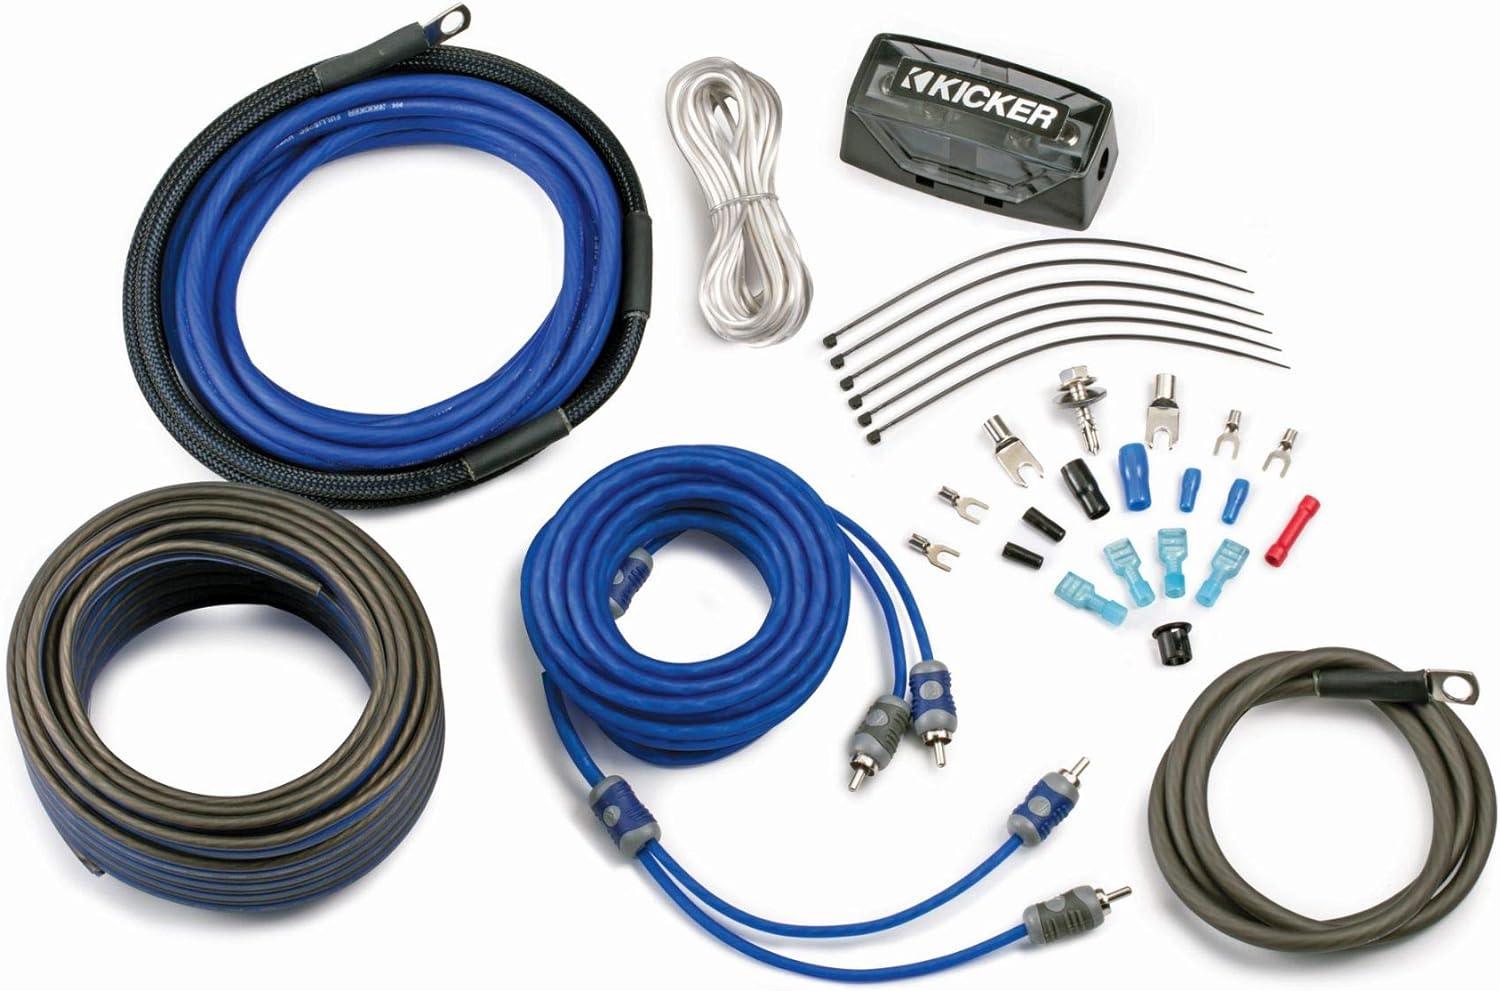 Car Audio 4Gauge Cable Kit Amp Amplifier Install RCA Subwoofer Sub